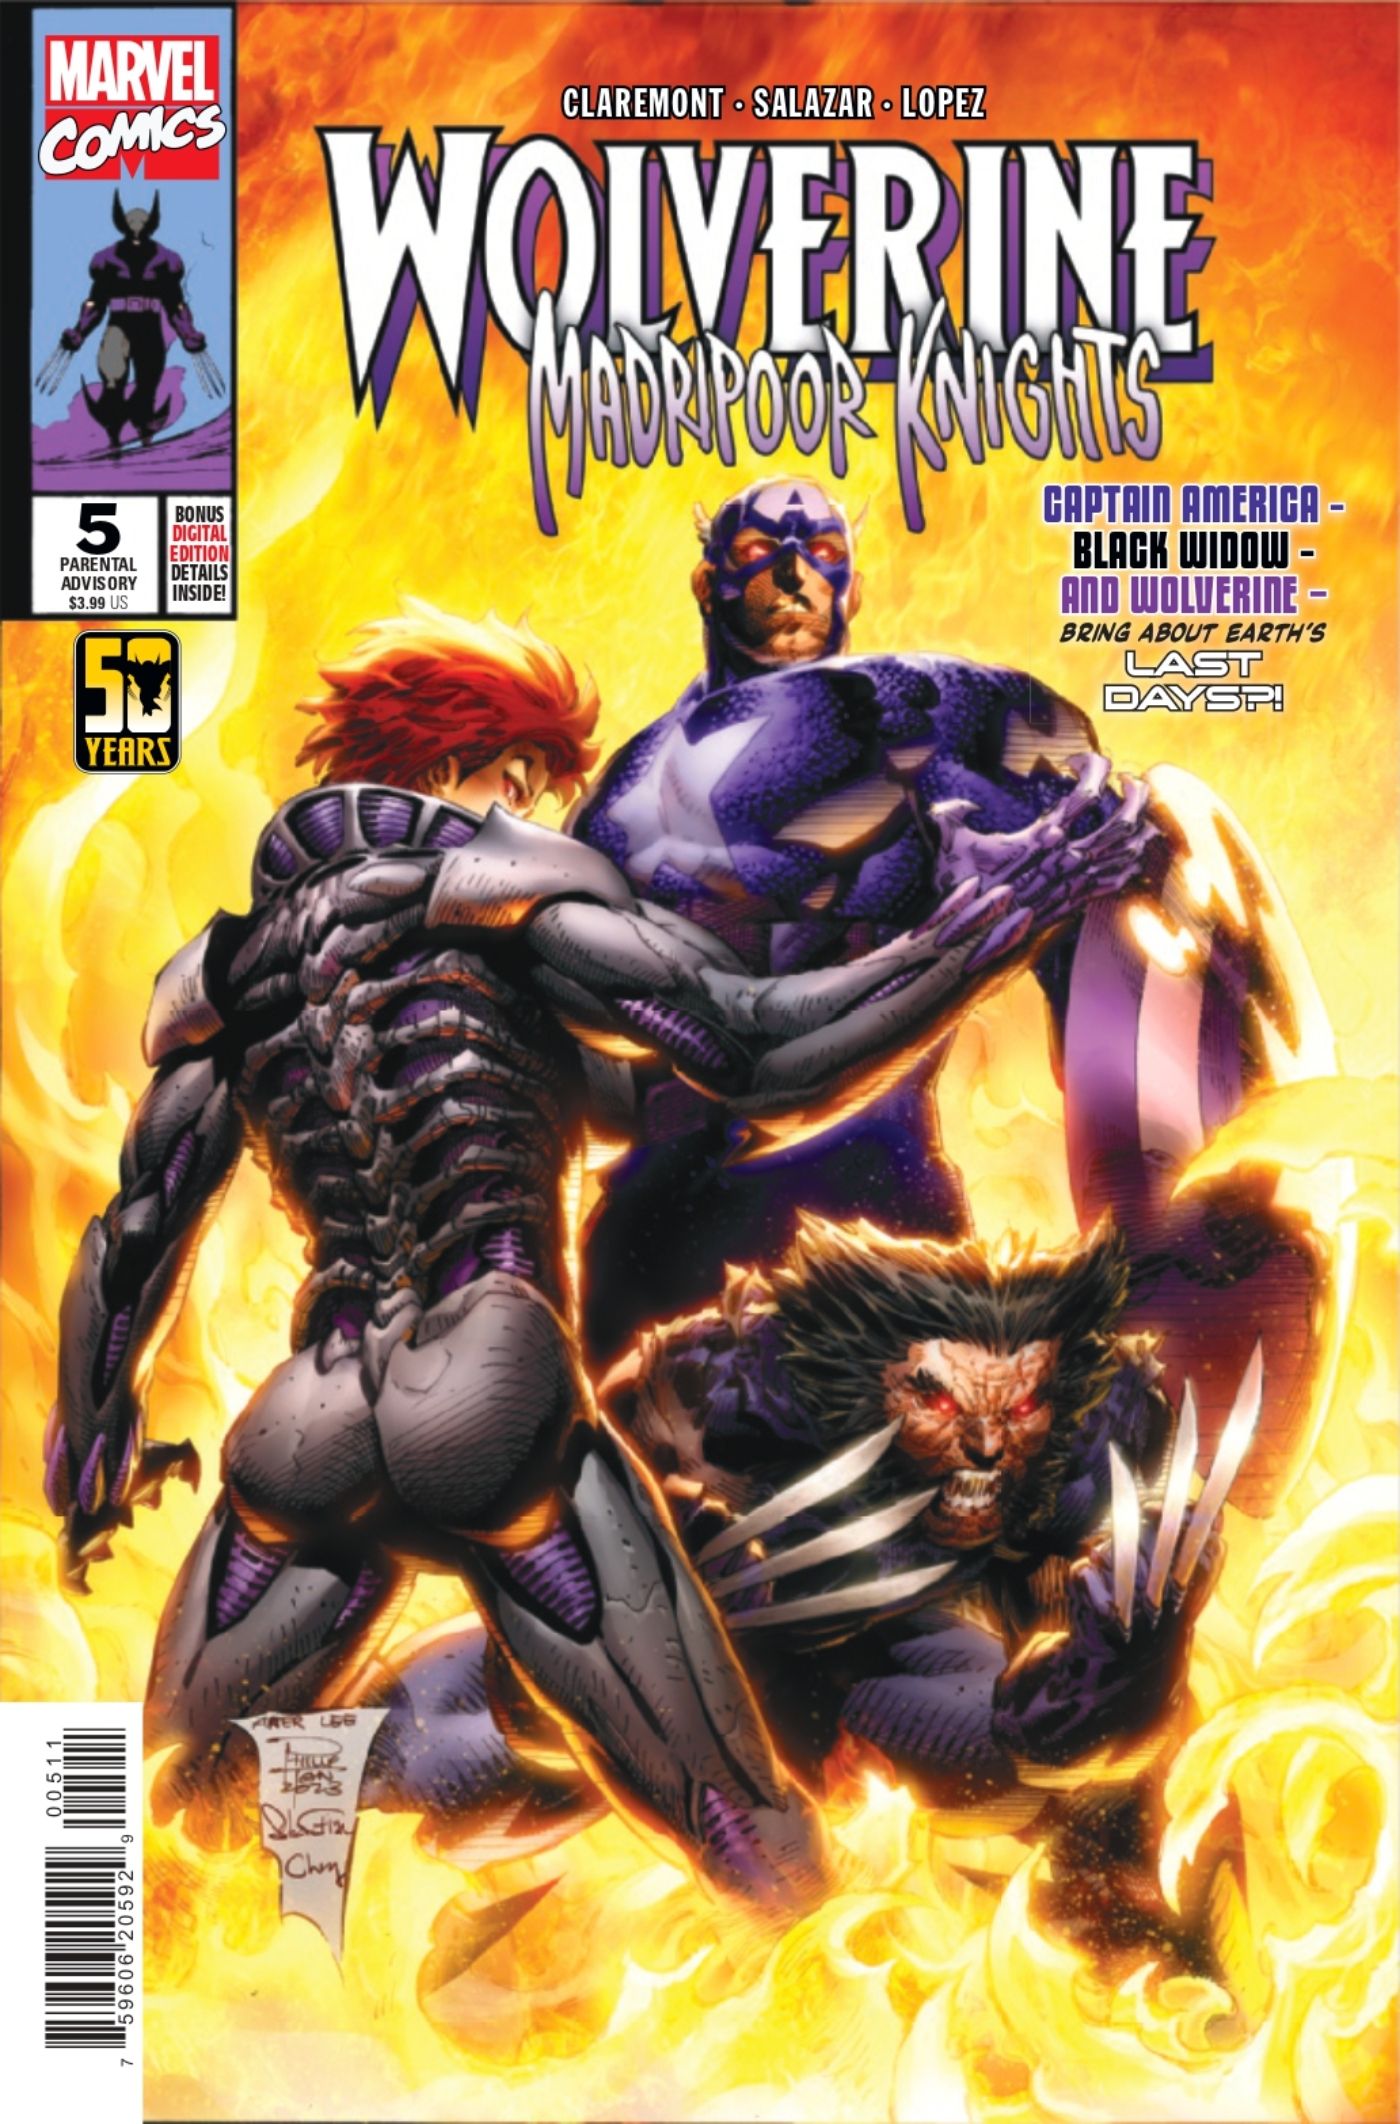 Wolverine: Madripoor Knights #5 cover, Black Widow, Wolverine, and Captain America in their new villain costumes.